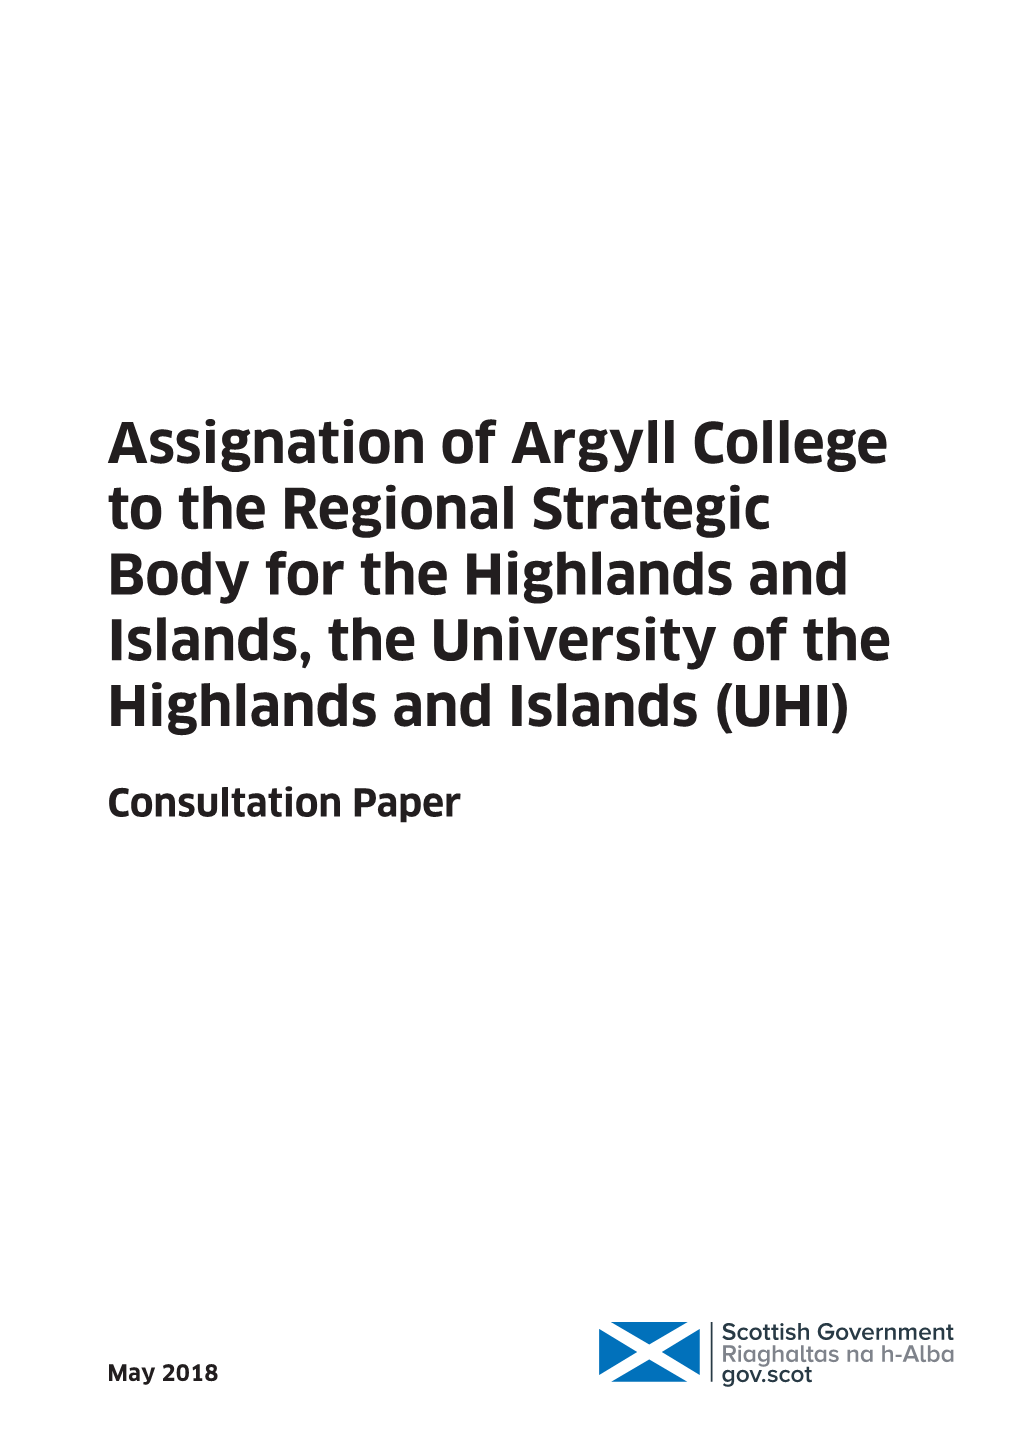 Assignation of Argyll College to the Regional Strategic Body for the Highlands and Islands, the University of the Highlands and Islands (UHI)